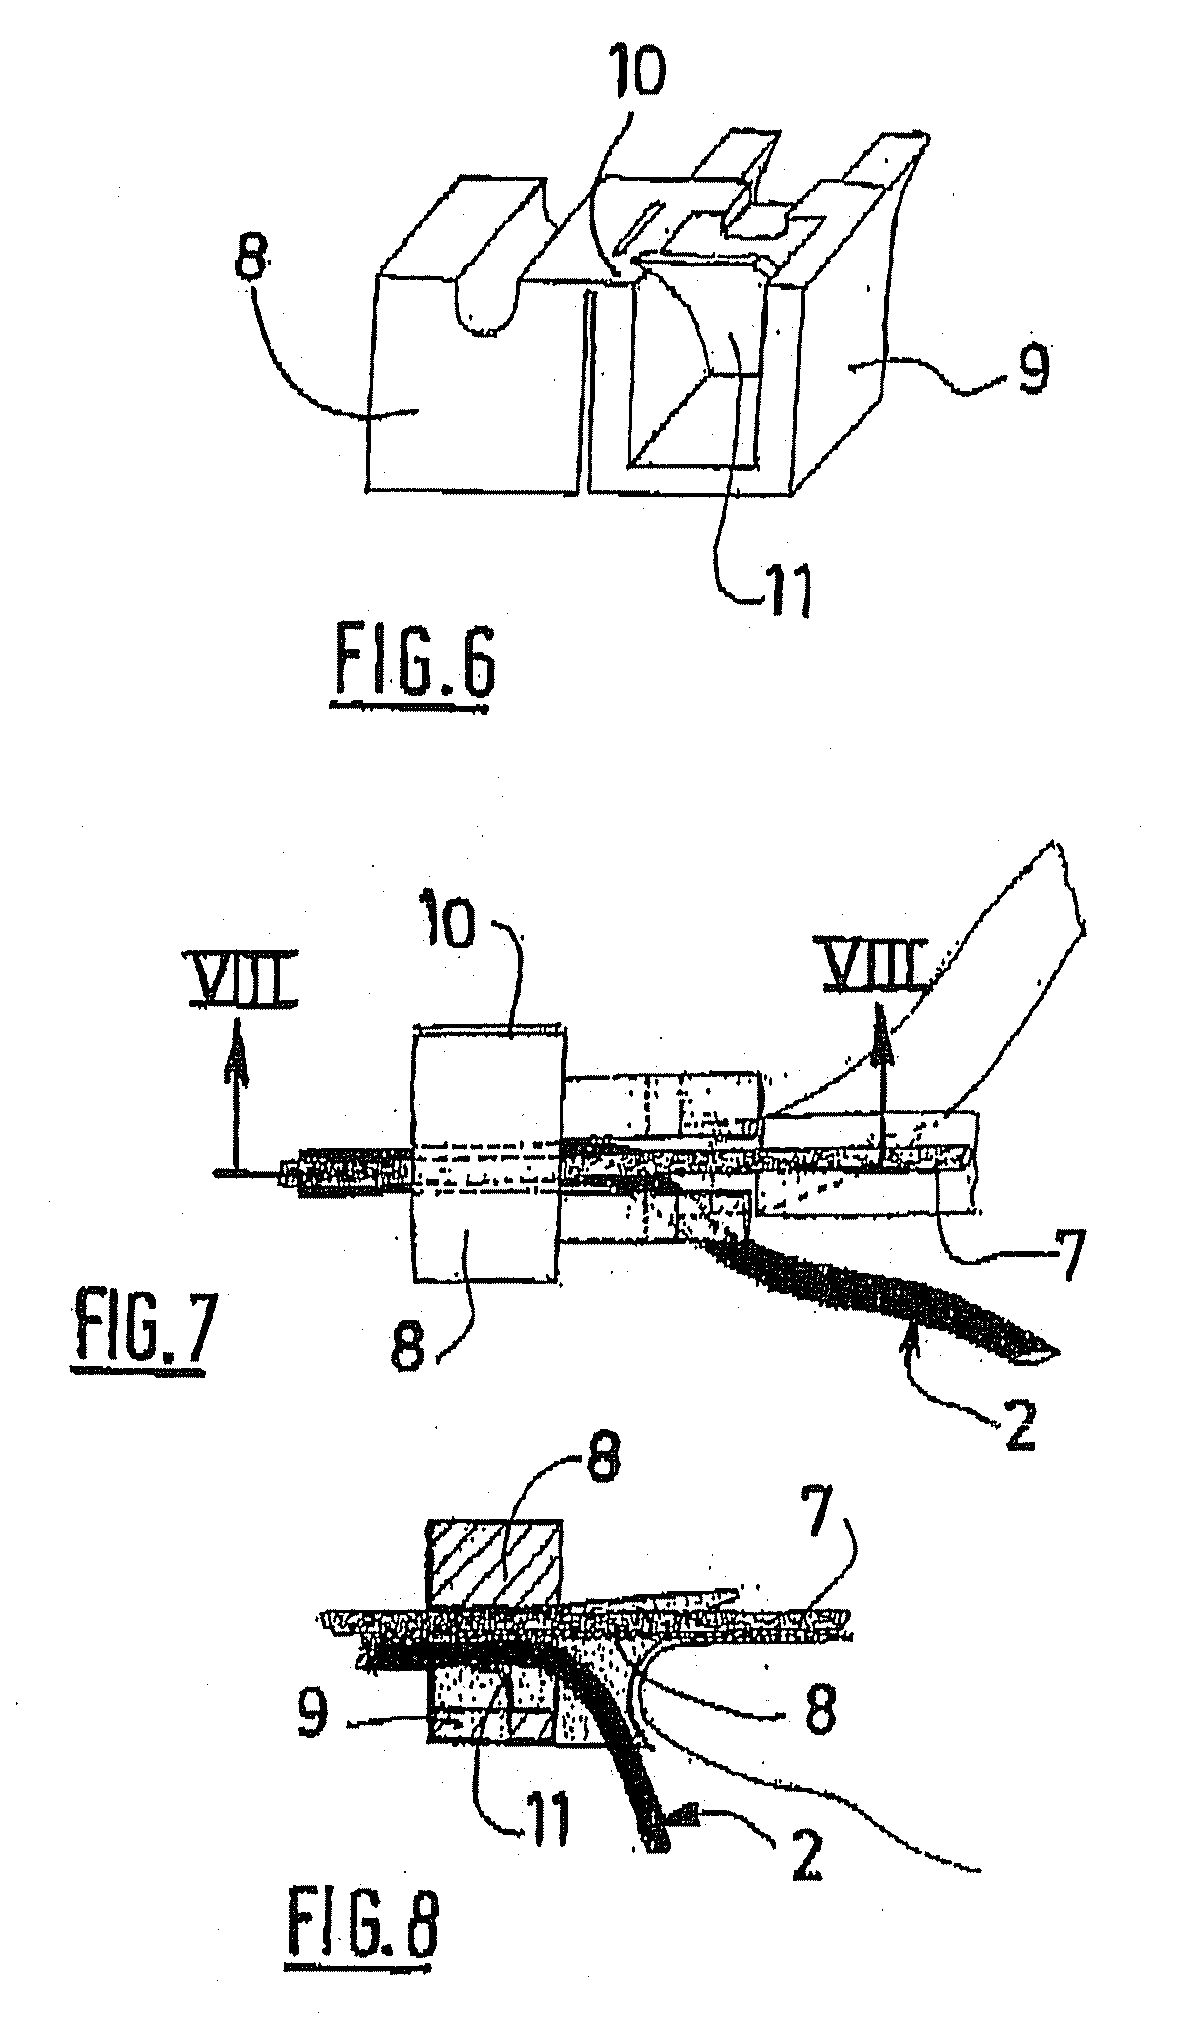 Identification device for visually identifying cables or ducts over their entire length